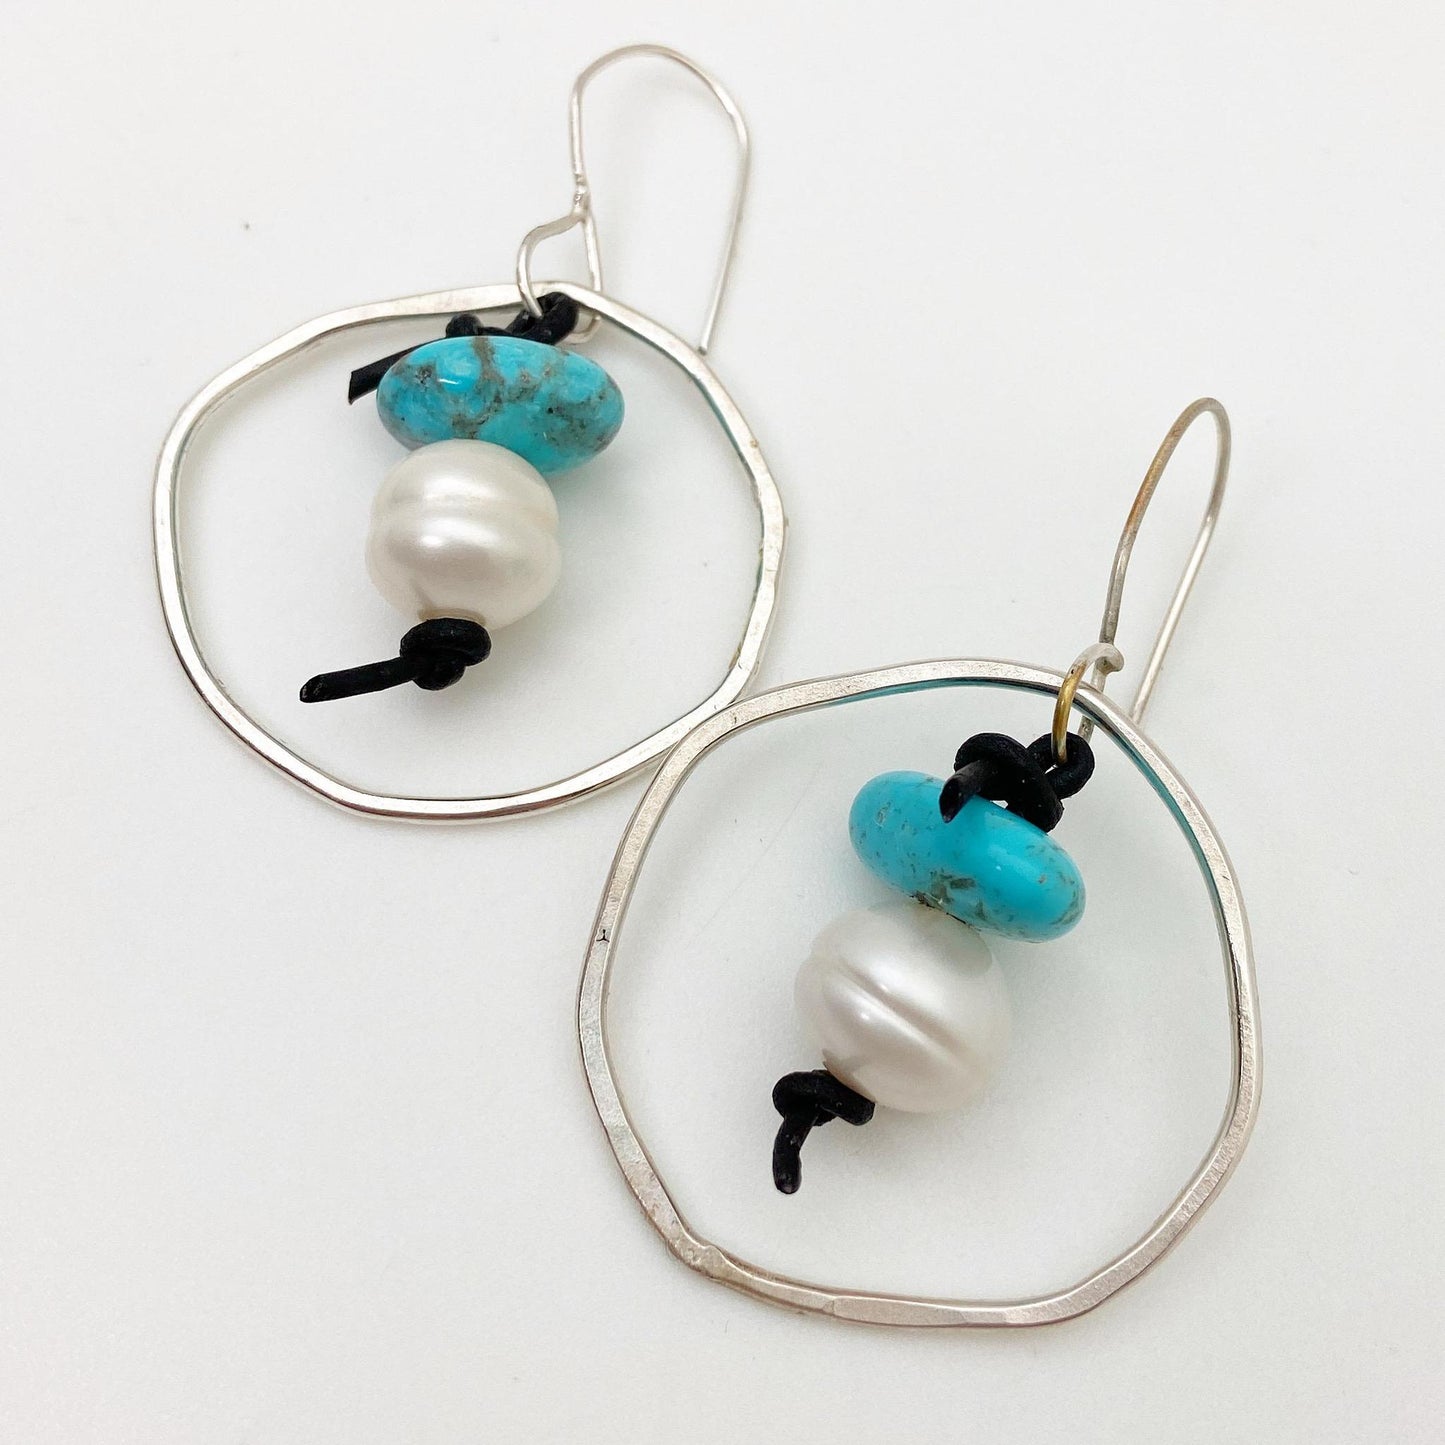 Earrings - Hoops with Turquoise and Pearl on Leather - Sterling Originals